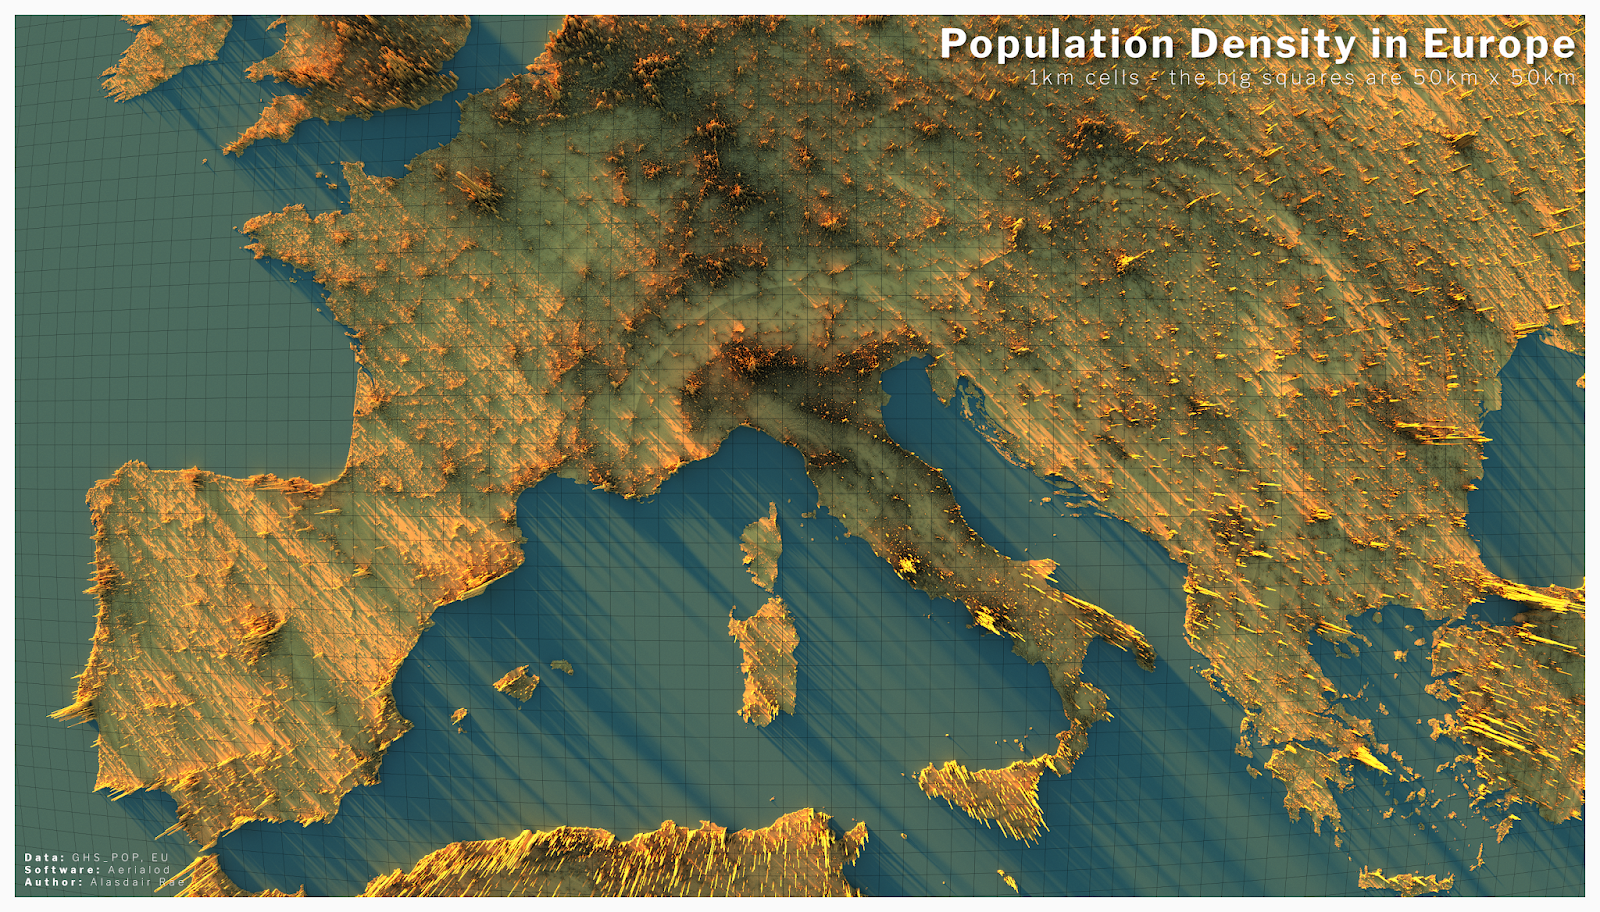 3D map showing population density across Europe